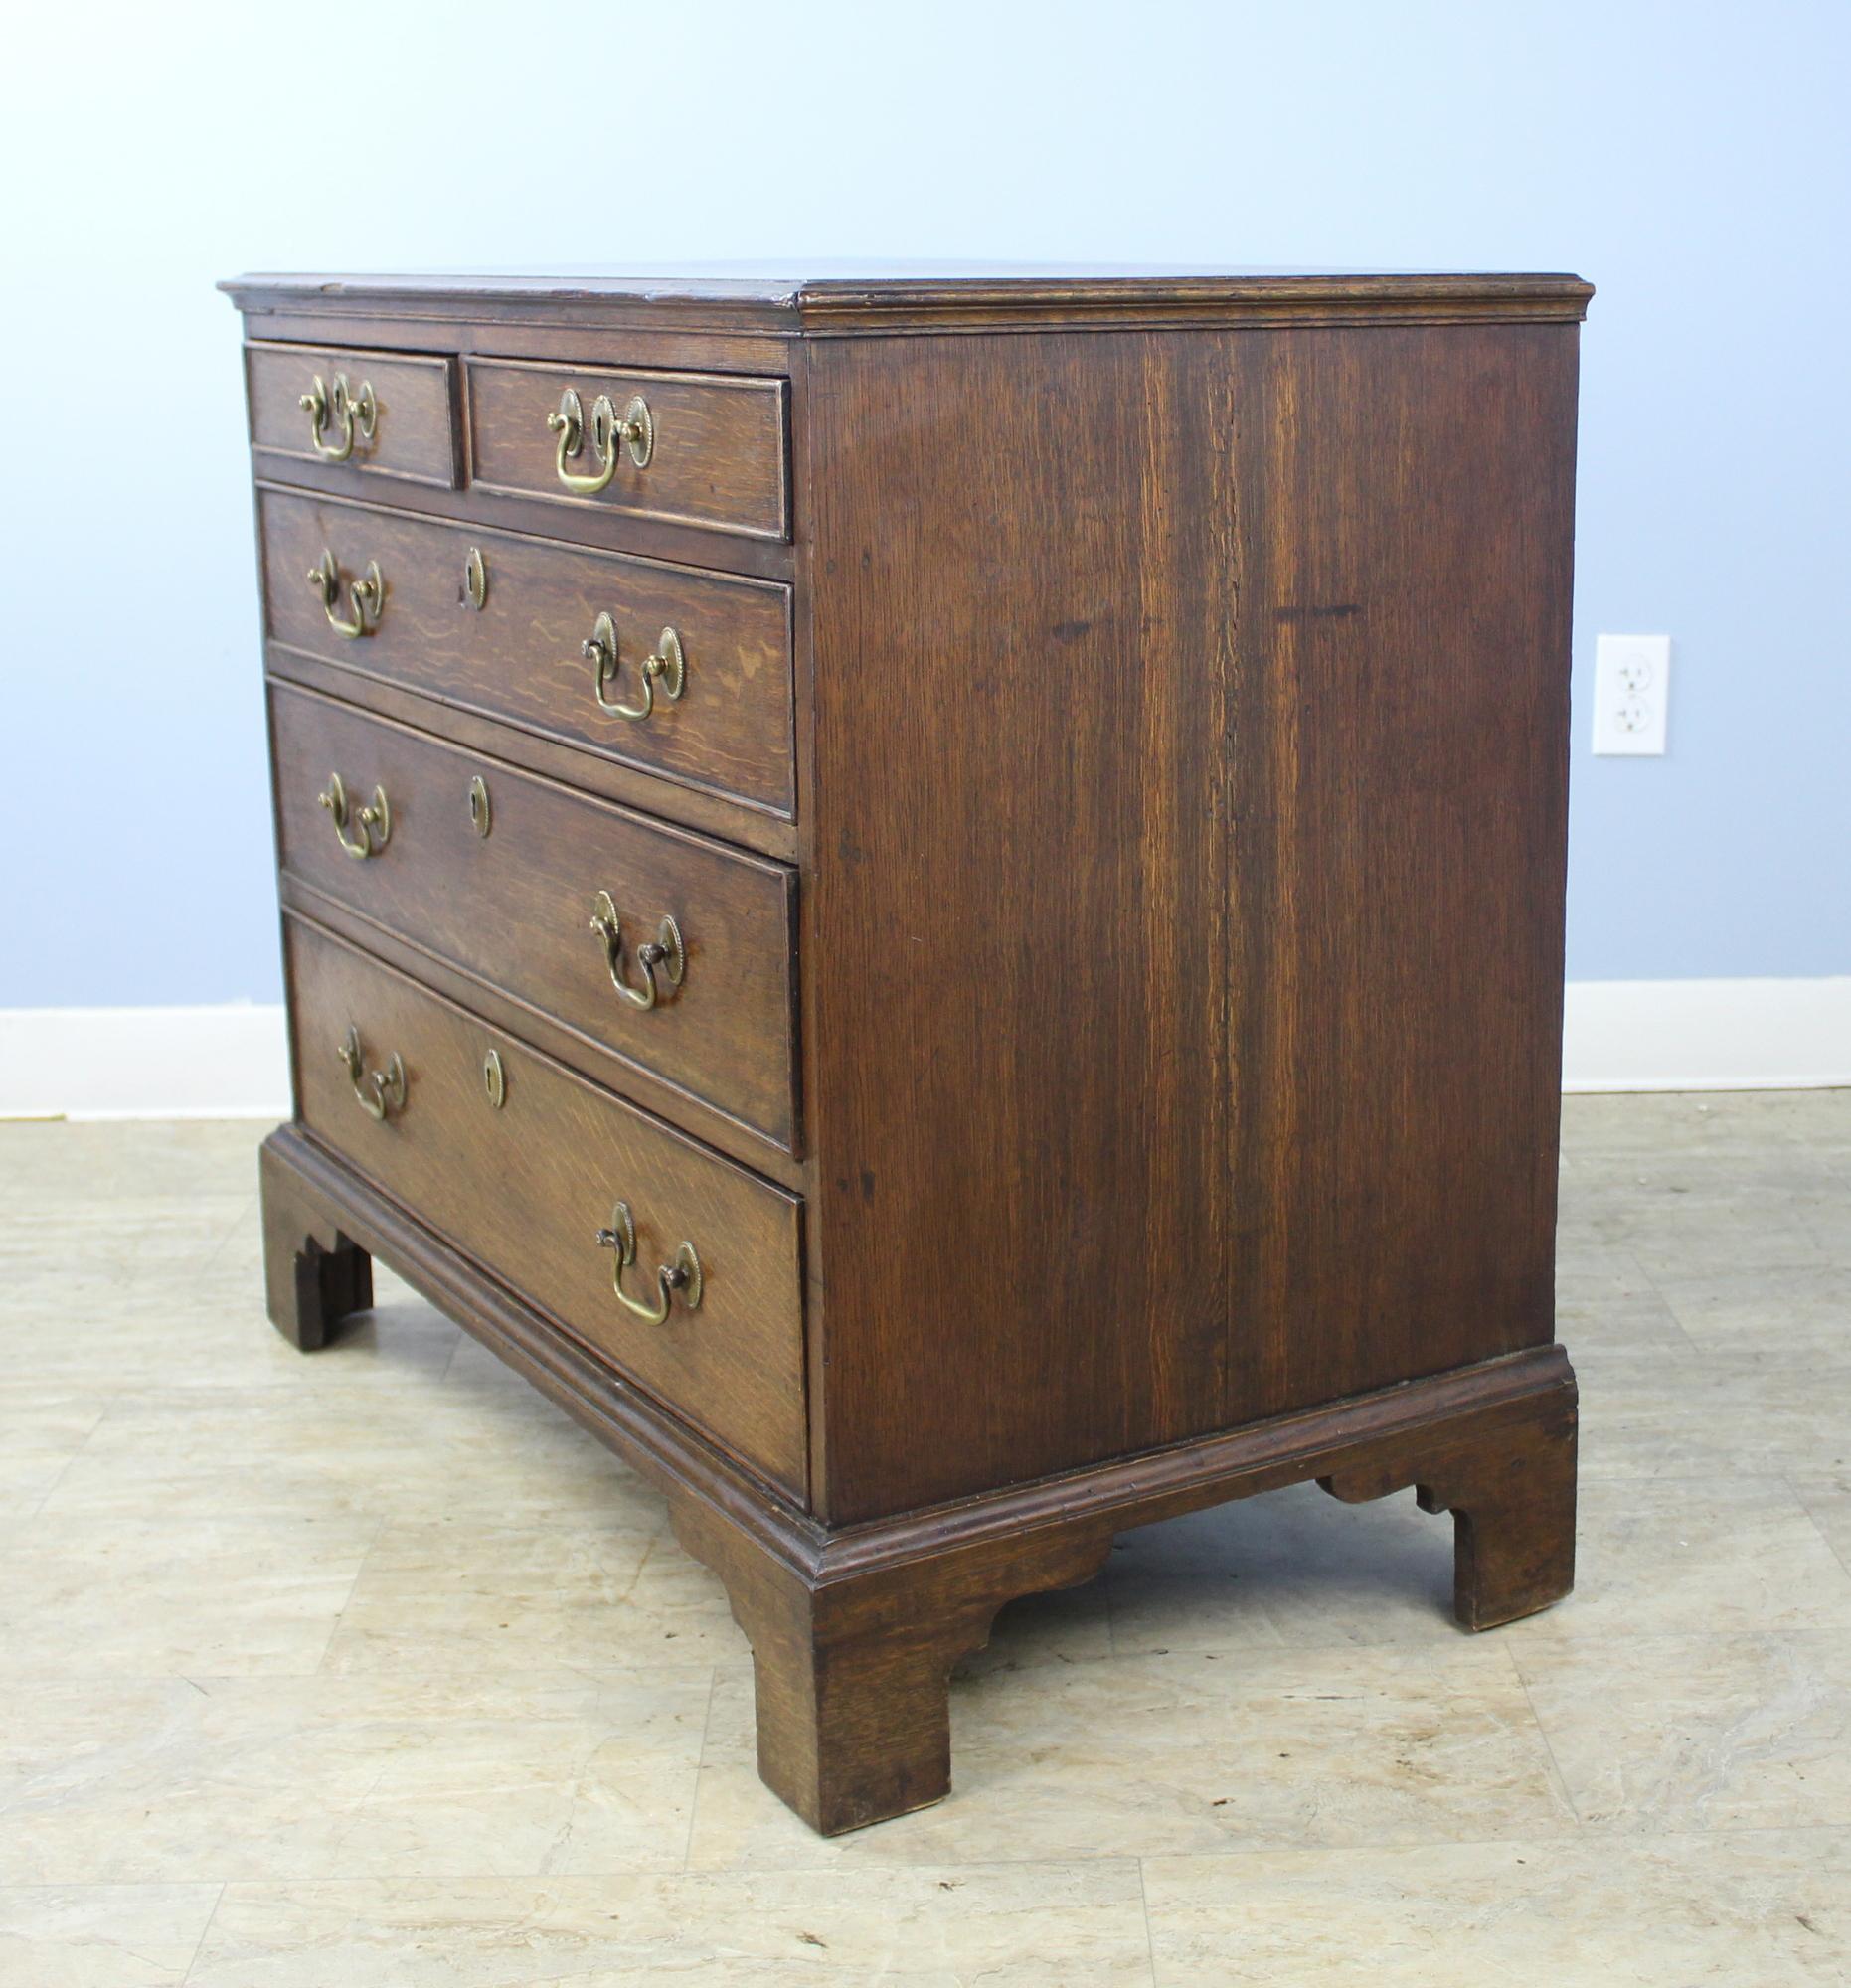 18th Century Small Welsh Period Oak Chest of Drawers, Original Hardware and Ogee Feet